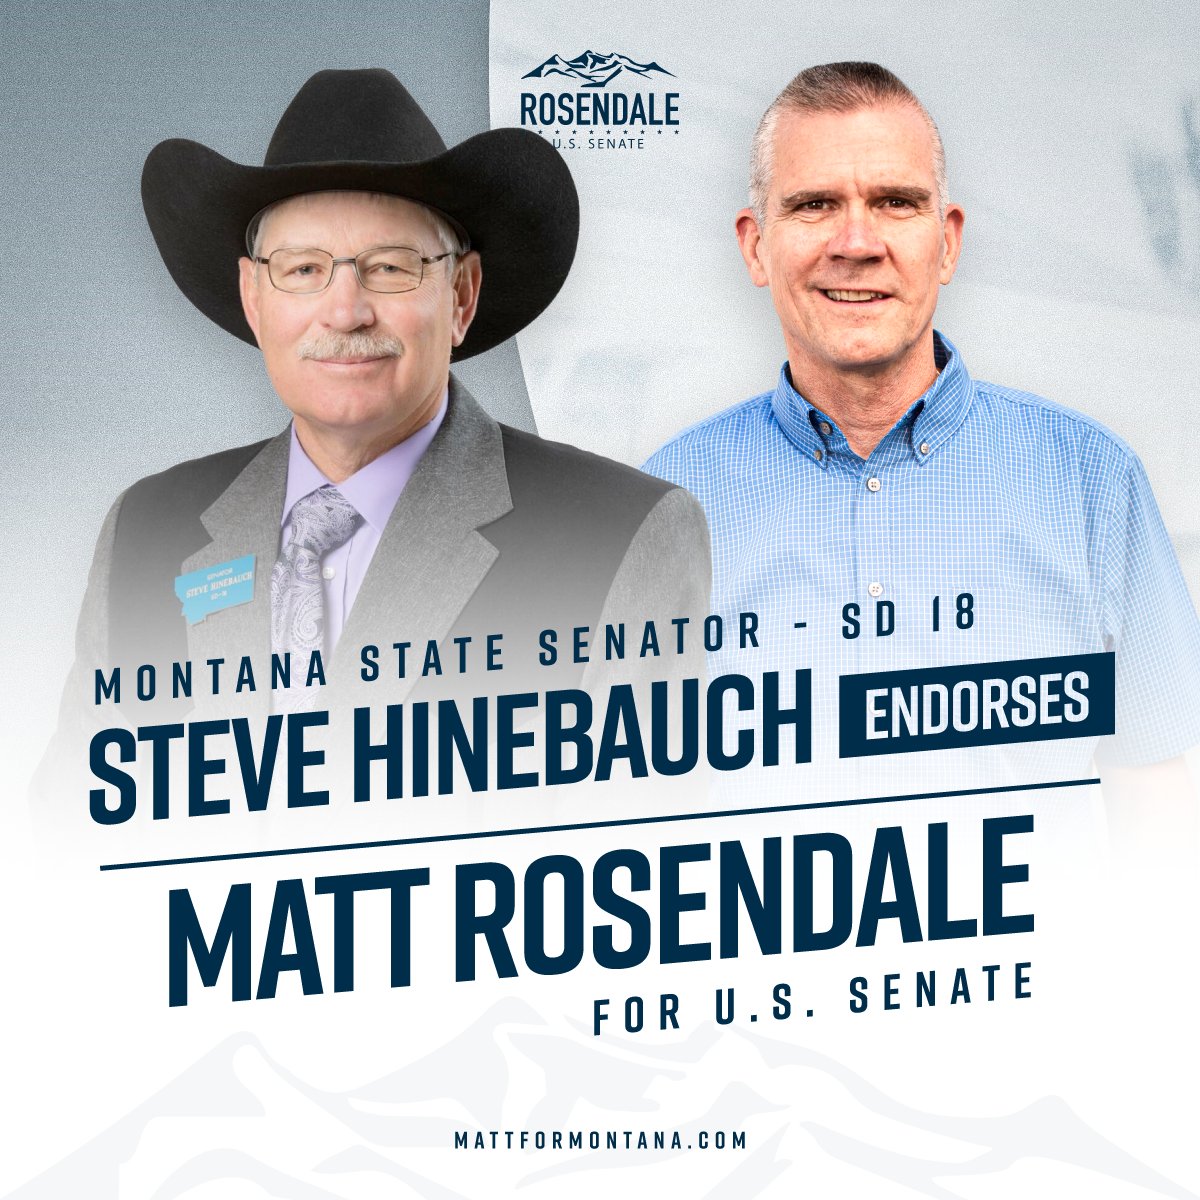 “Finally, in my lifetime we have a statesman, in Matt Rosendale, who will go back to DC and say 'Enough is enough!' We know he will fight for freedom, not just because he says he will, but because he has been doing it. I am very excited about Matt's run for the US Senate.”